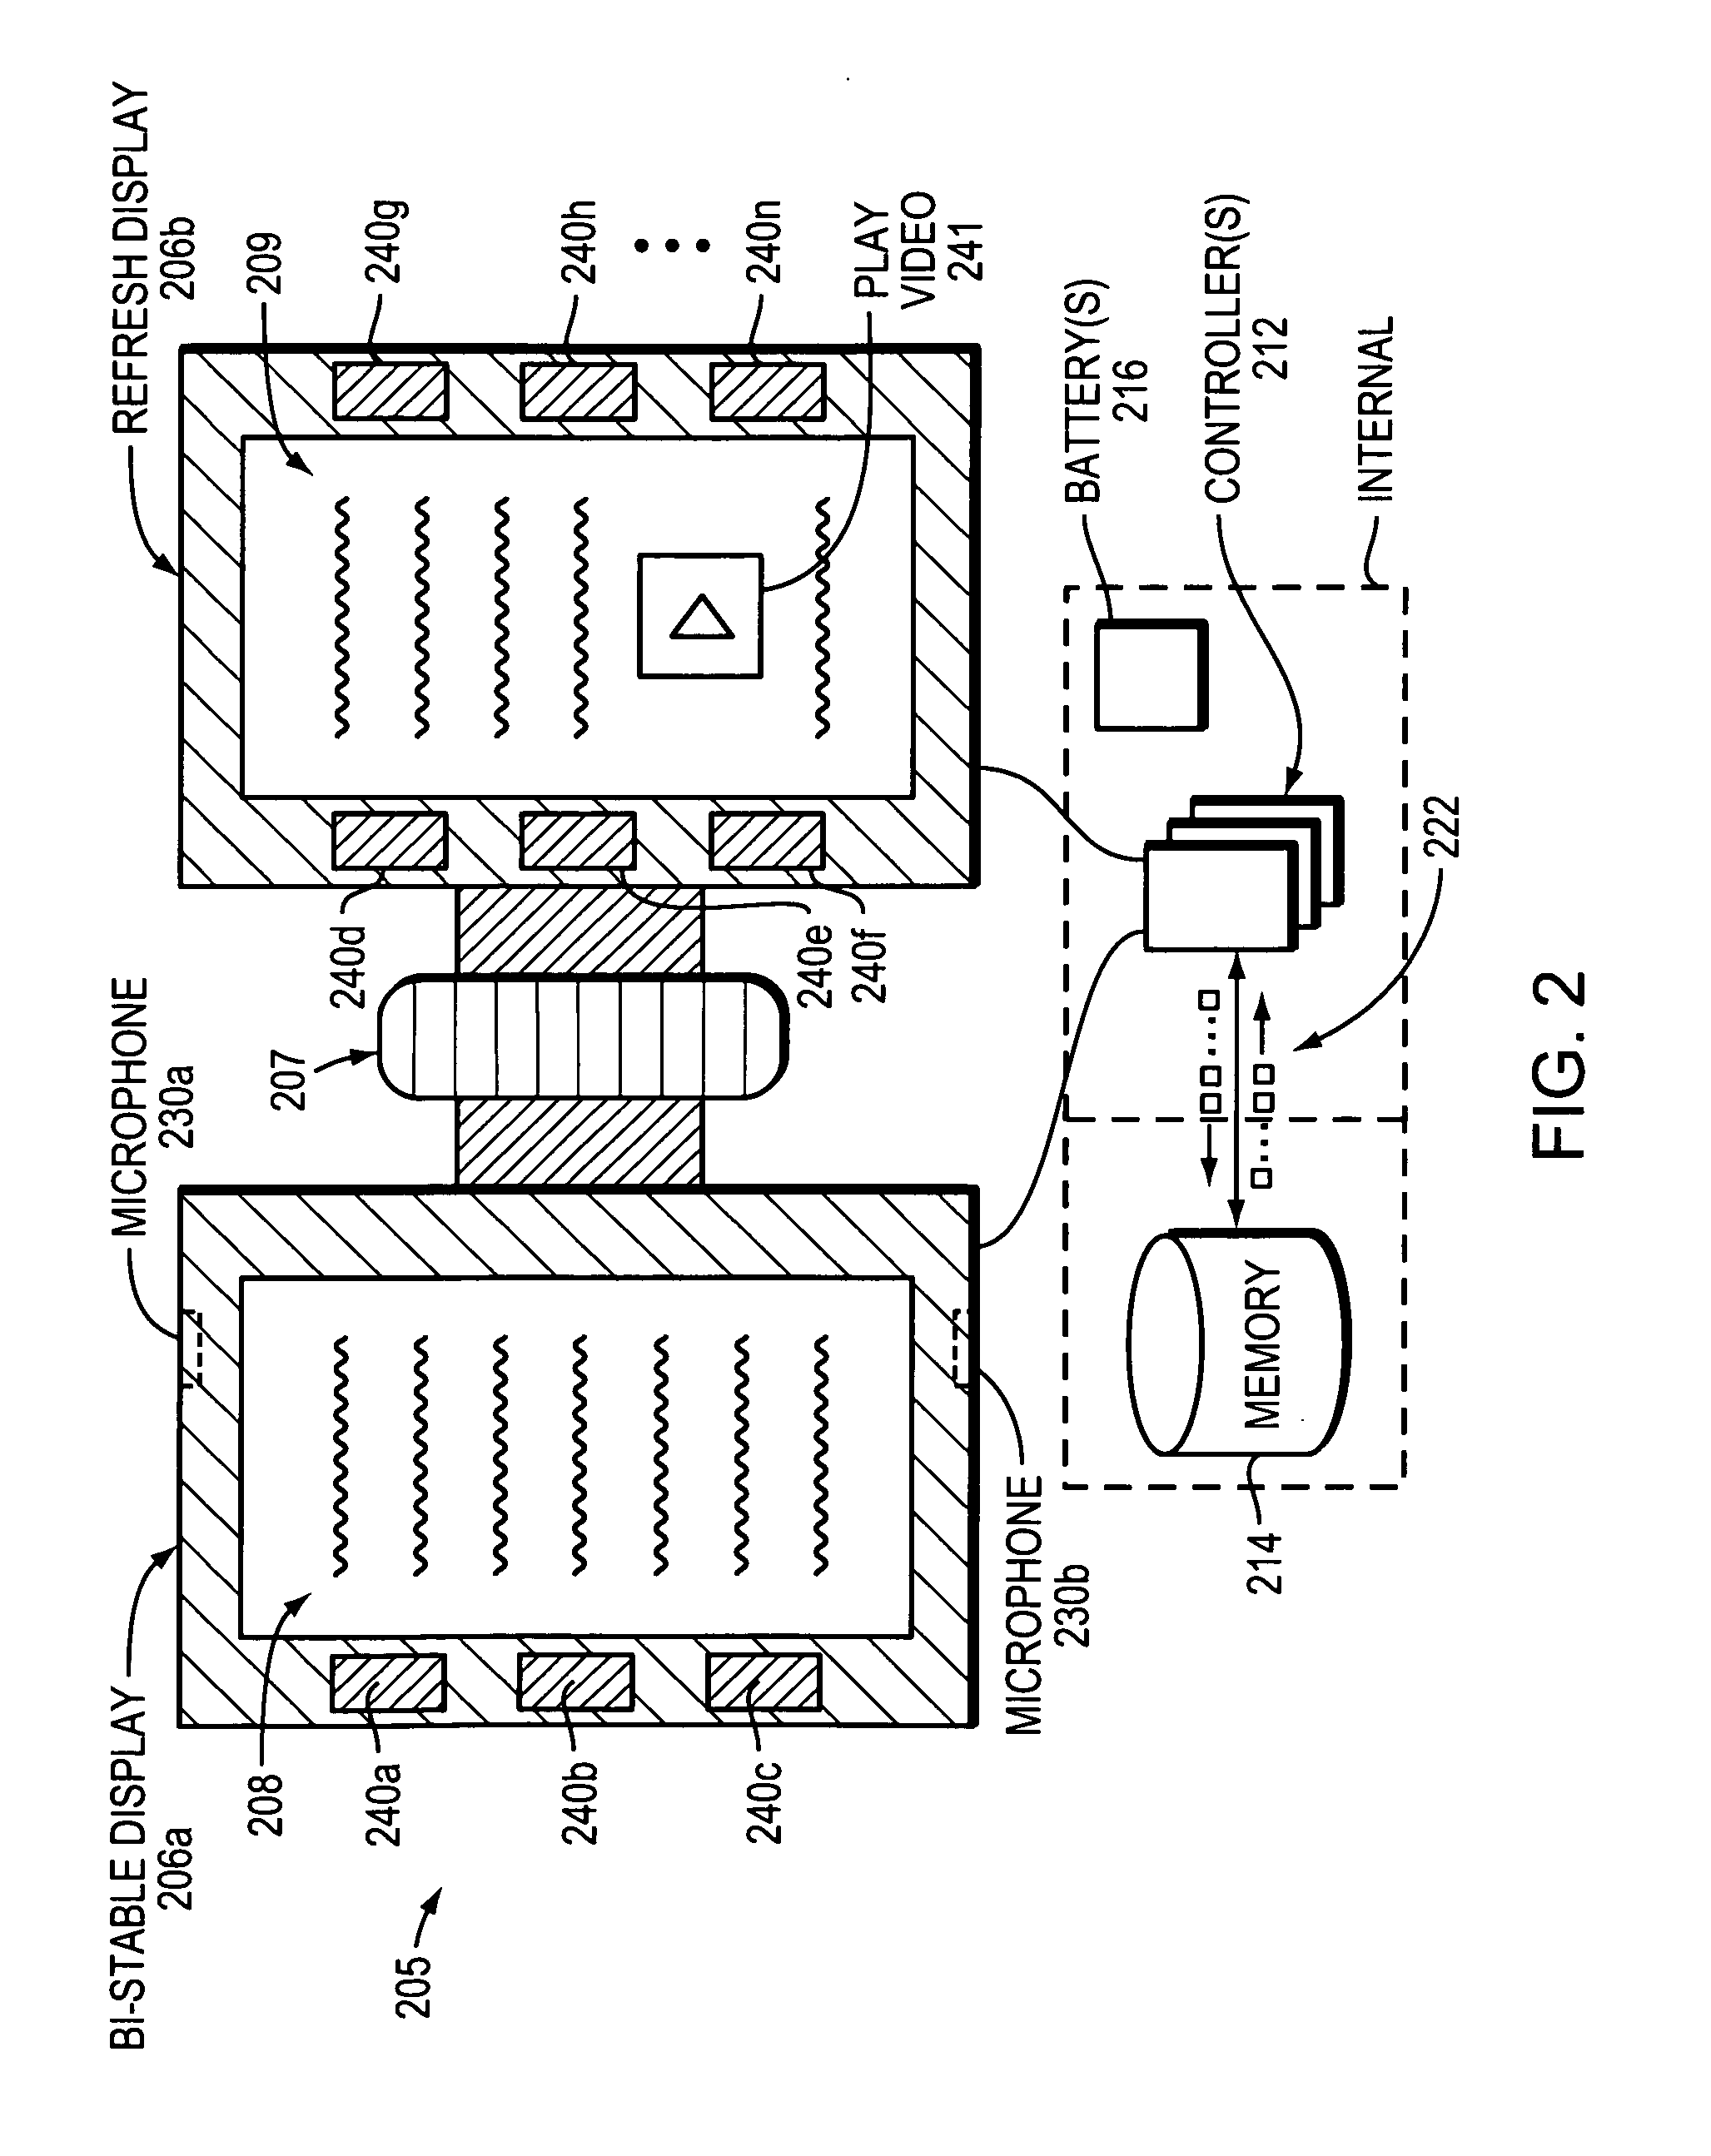 Multi-display handheld device and supporting system